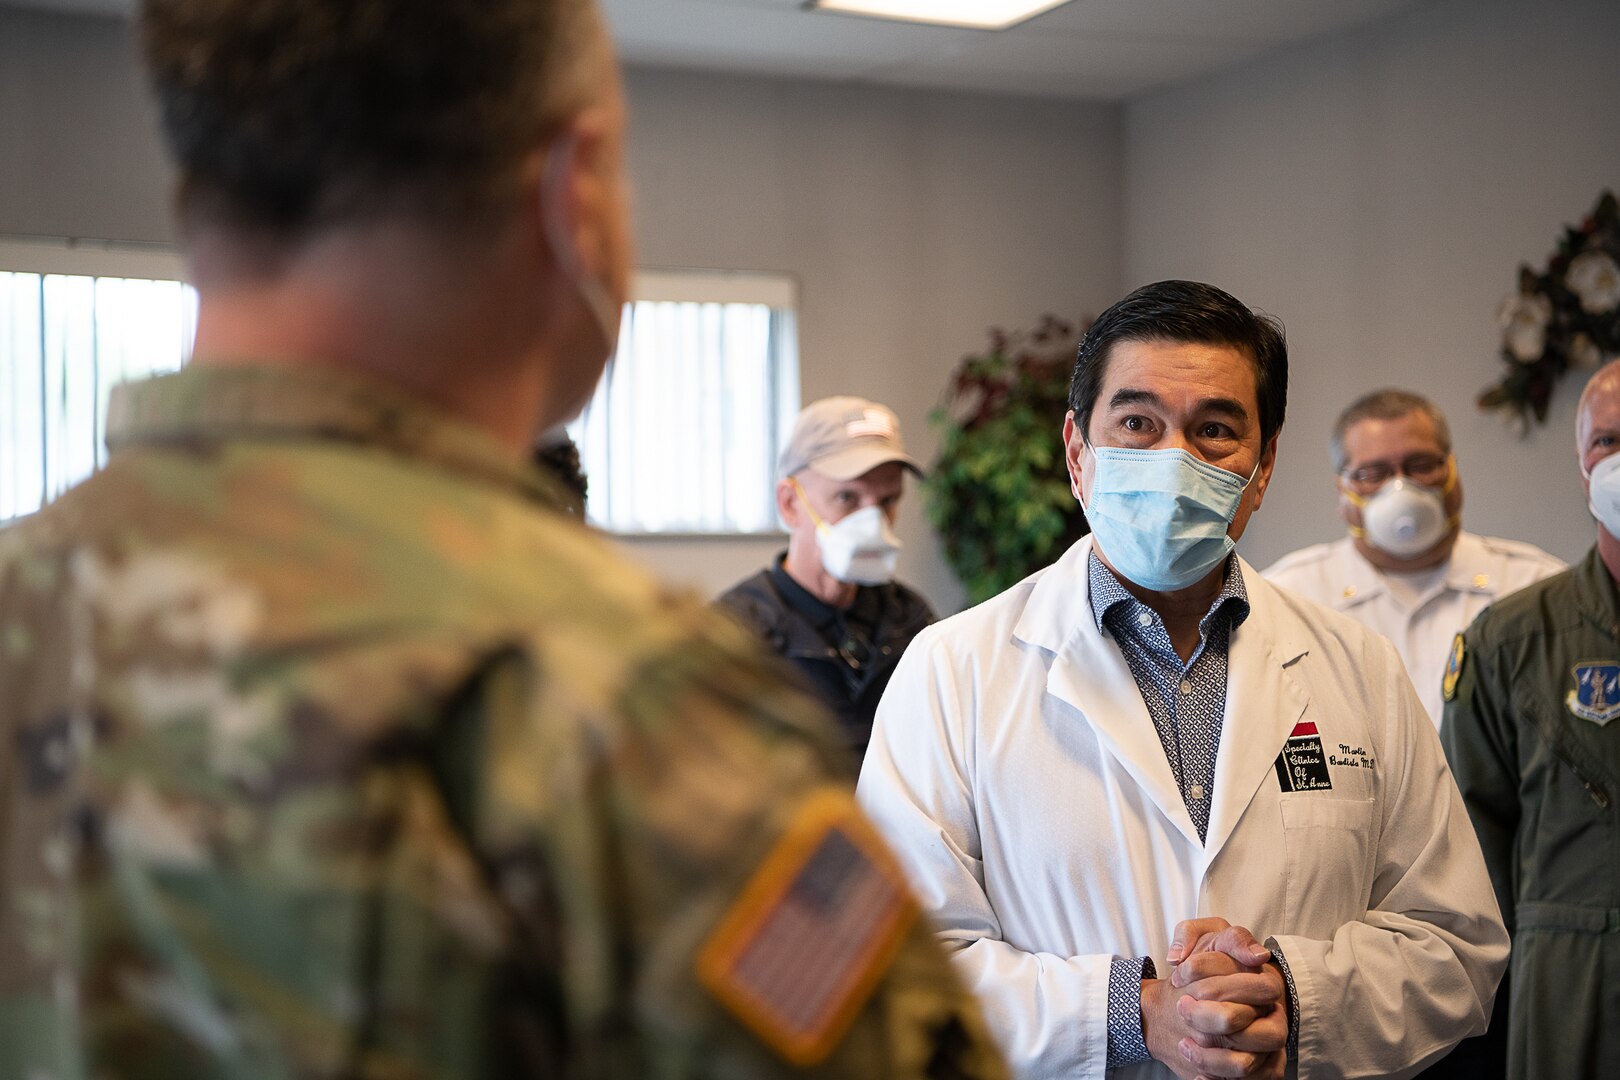 Dr. Martin Bautista, a physician at the Memorial Hospital of Texas County in Guymon, Oklahoma, welcomes members of the Oklahoma Army and Air National Guard, Centers for Disease Control and Prevention, the Oklahoma State Department of Health, Oklahoma State University laboratories, and the Federal Emergency Management Agency, during a visit to the hospital, May 15, 2020. As of May 19, 2020, Guymon had 650 confirmed cases of COVID-19, making it second in the total number of cases in Oklahoma. Oklahoma City, which has the highest number of COVID-19 cases, has the largest population of any city in Oklahoma, Guymon is 40th. Beginning at the Memorial Hospital of Texas County, which has been seeing an average of three to four COVID-19 patients a day, and then moving on to the Texas County Health Department and the Seaboard Foods pork processing plant, the group focused on creating solutions to issues such as facility layouts, and supply, resources, and staffing shortages. (Oklahoma Air National Guard photo by Tech. Sgt. Kasey M. Phipps)